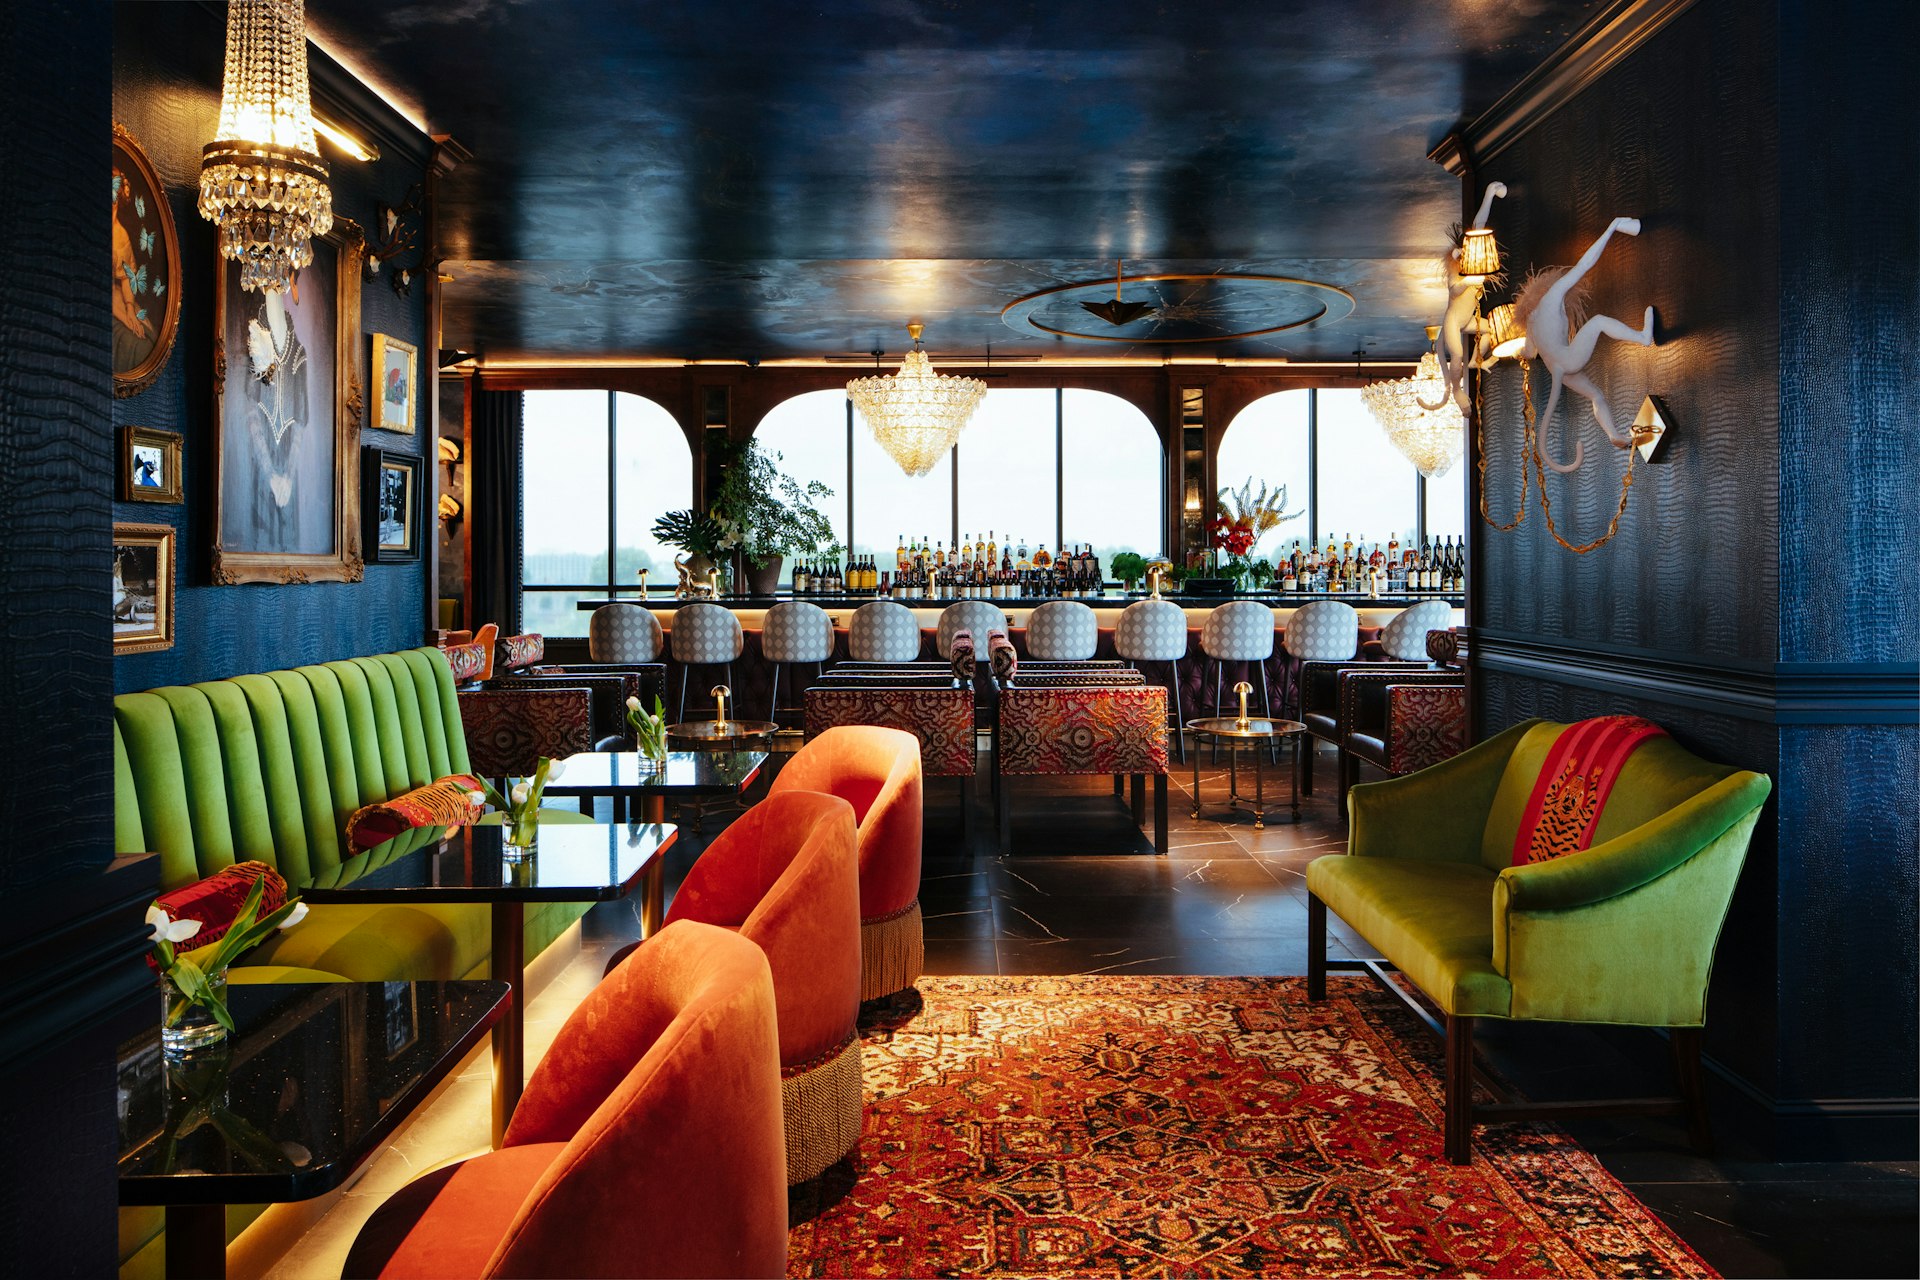 The interior of Tiger & Peacock, the rooftop bar at The Memphian hotel, Memphis, Tennessee, USA